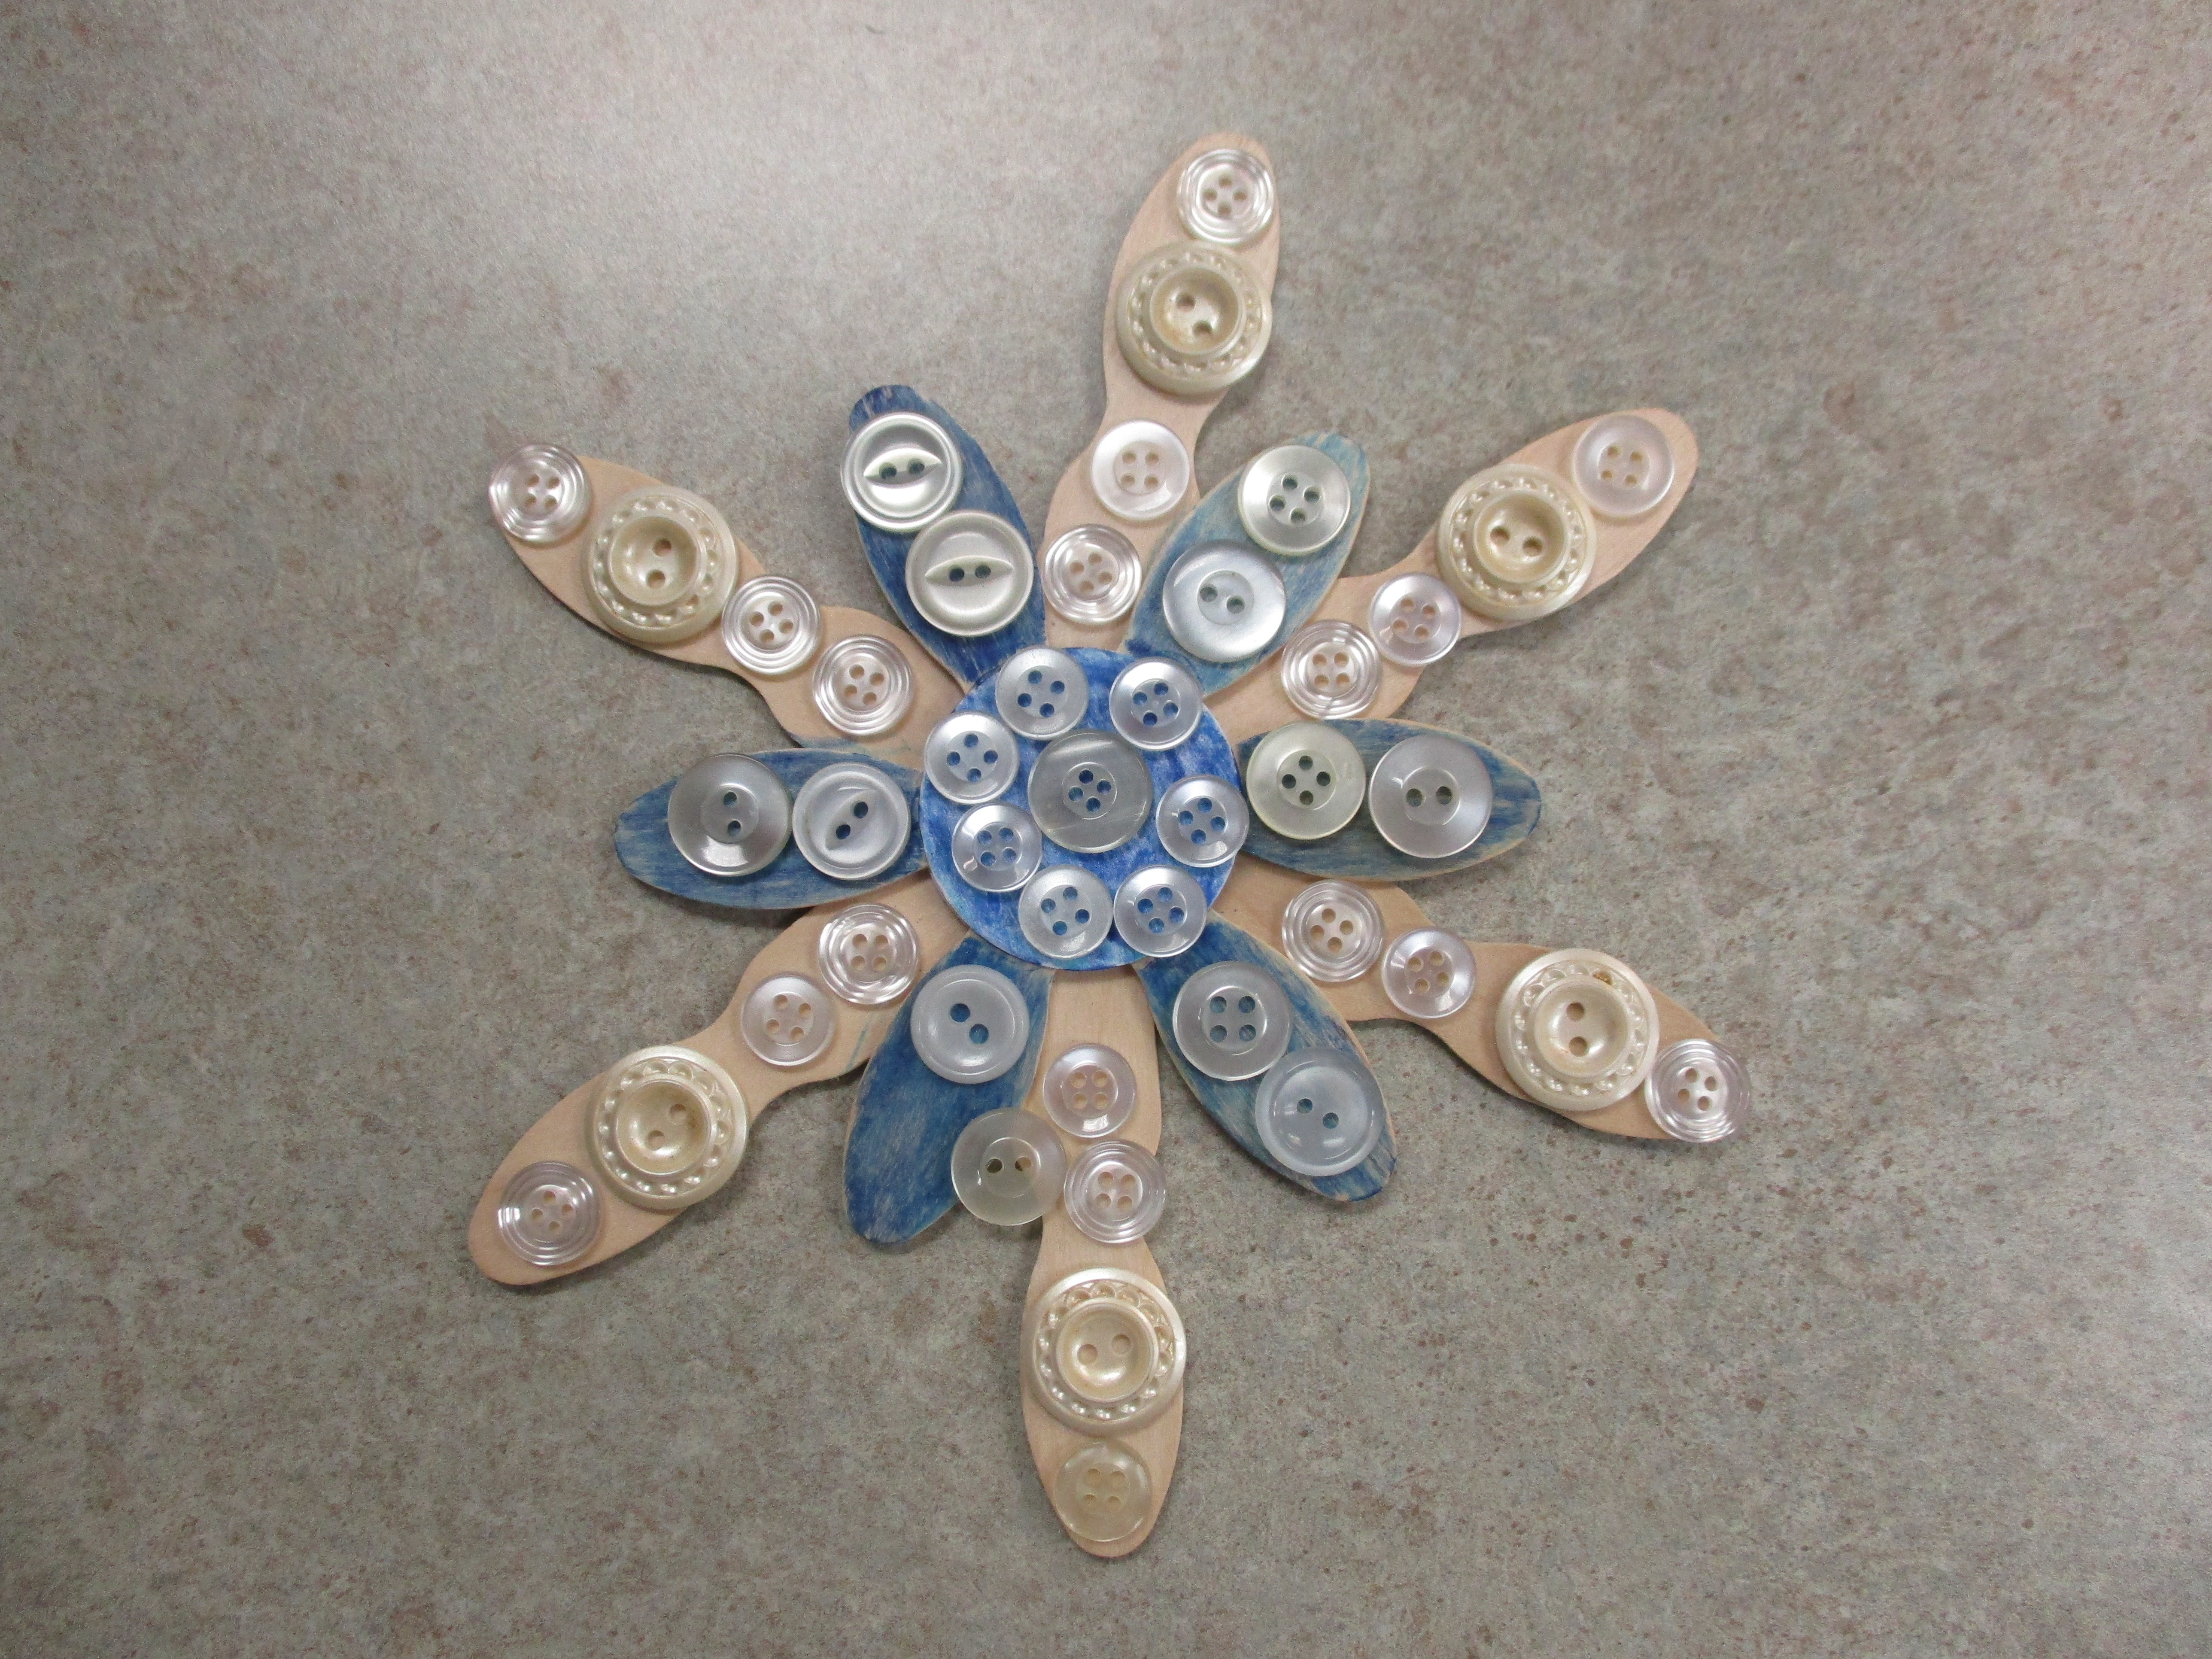 Snowflake ornament made out of buttons and popsicle sticks.